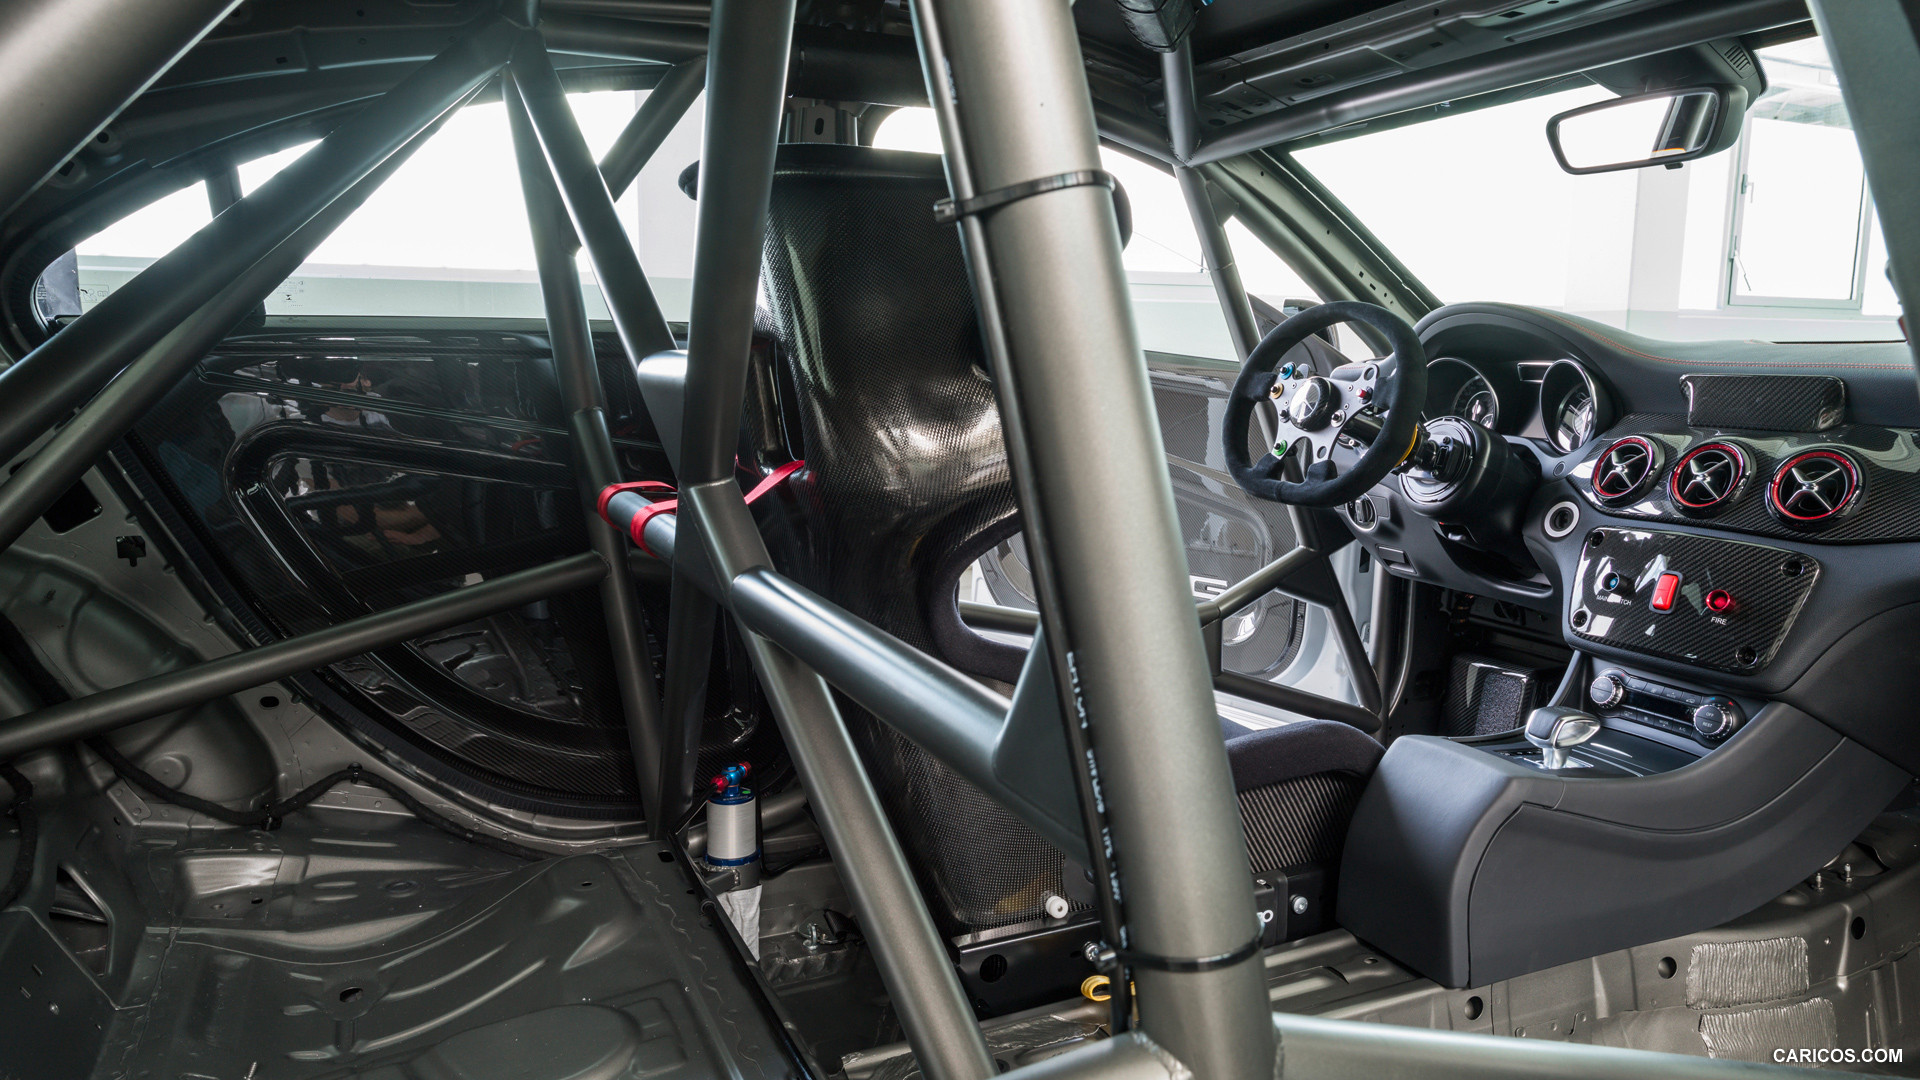 2013 Mercedes-Benz CLA 45 AMG Racing Series Concept Roll Cage - Interior, #19 of 26